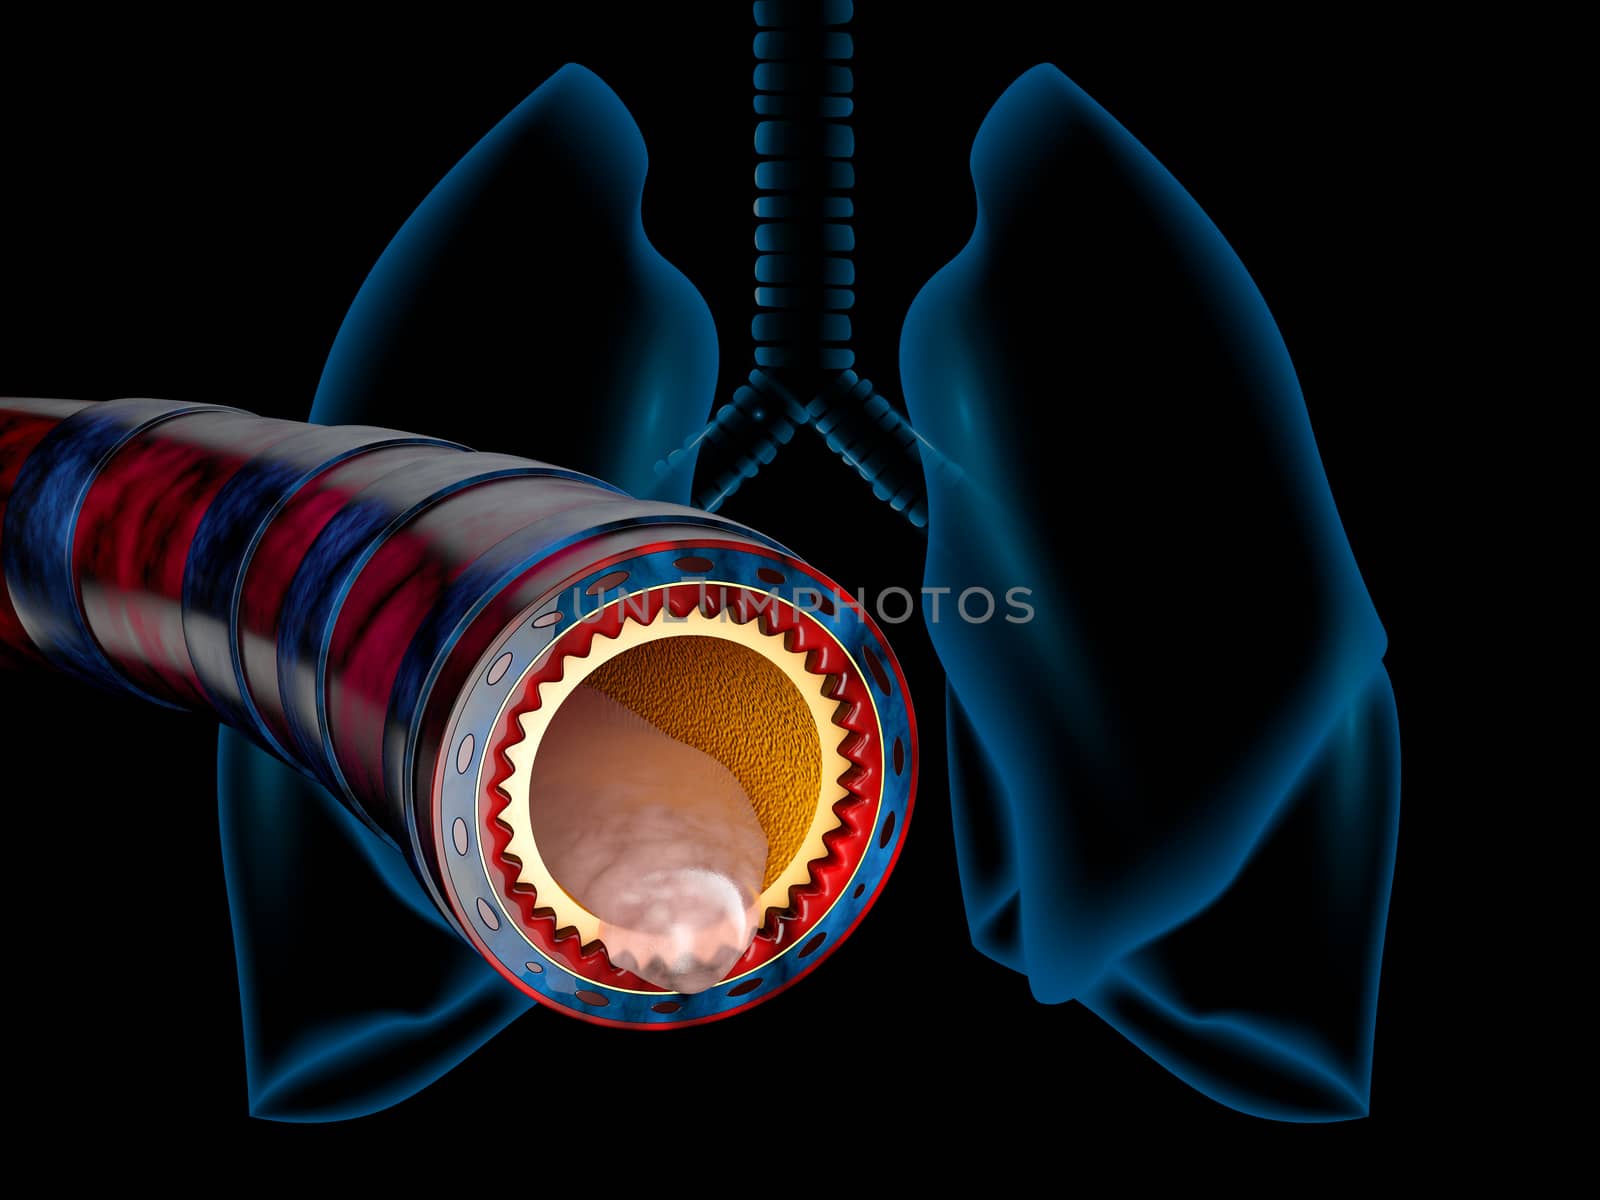 Bronchitis anatomy, mucus secreted as a chest cold as a 3D illustration.